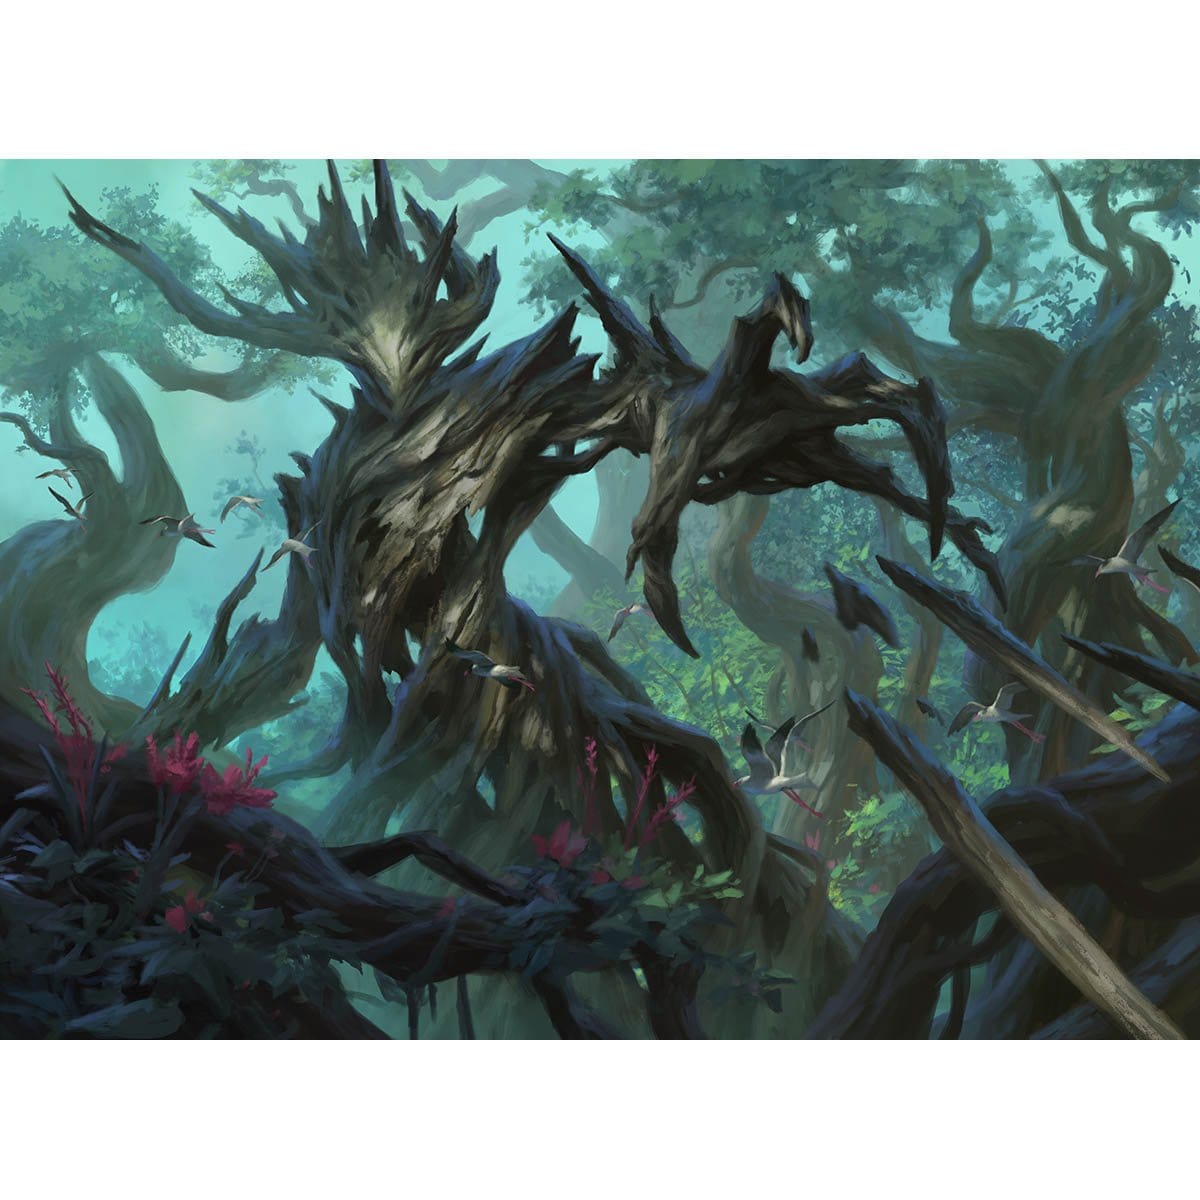 Thorn Elemental Print - Print - Original Magic Art - Accessories for Magic the Gathering and other card games